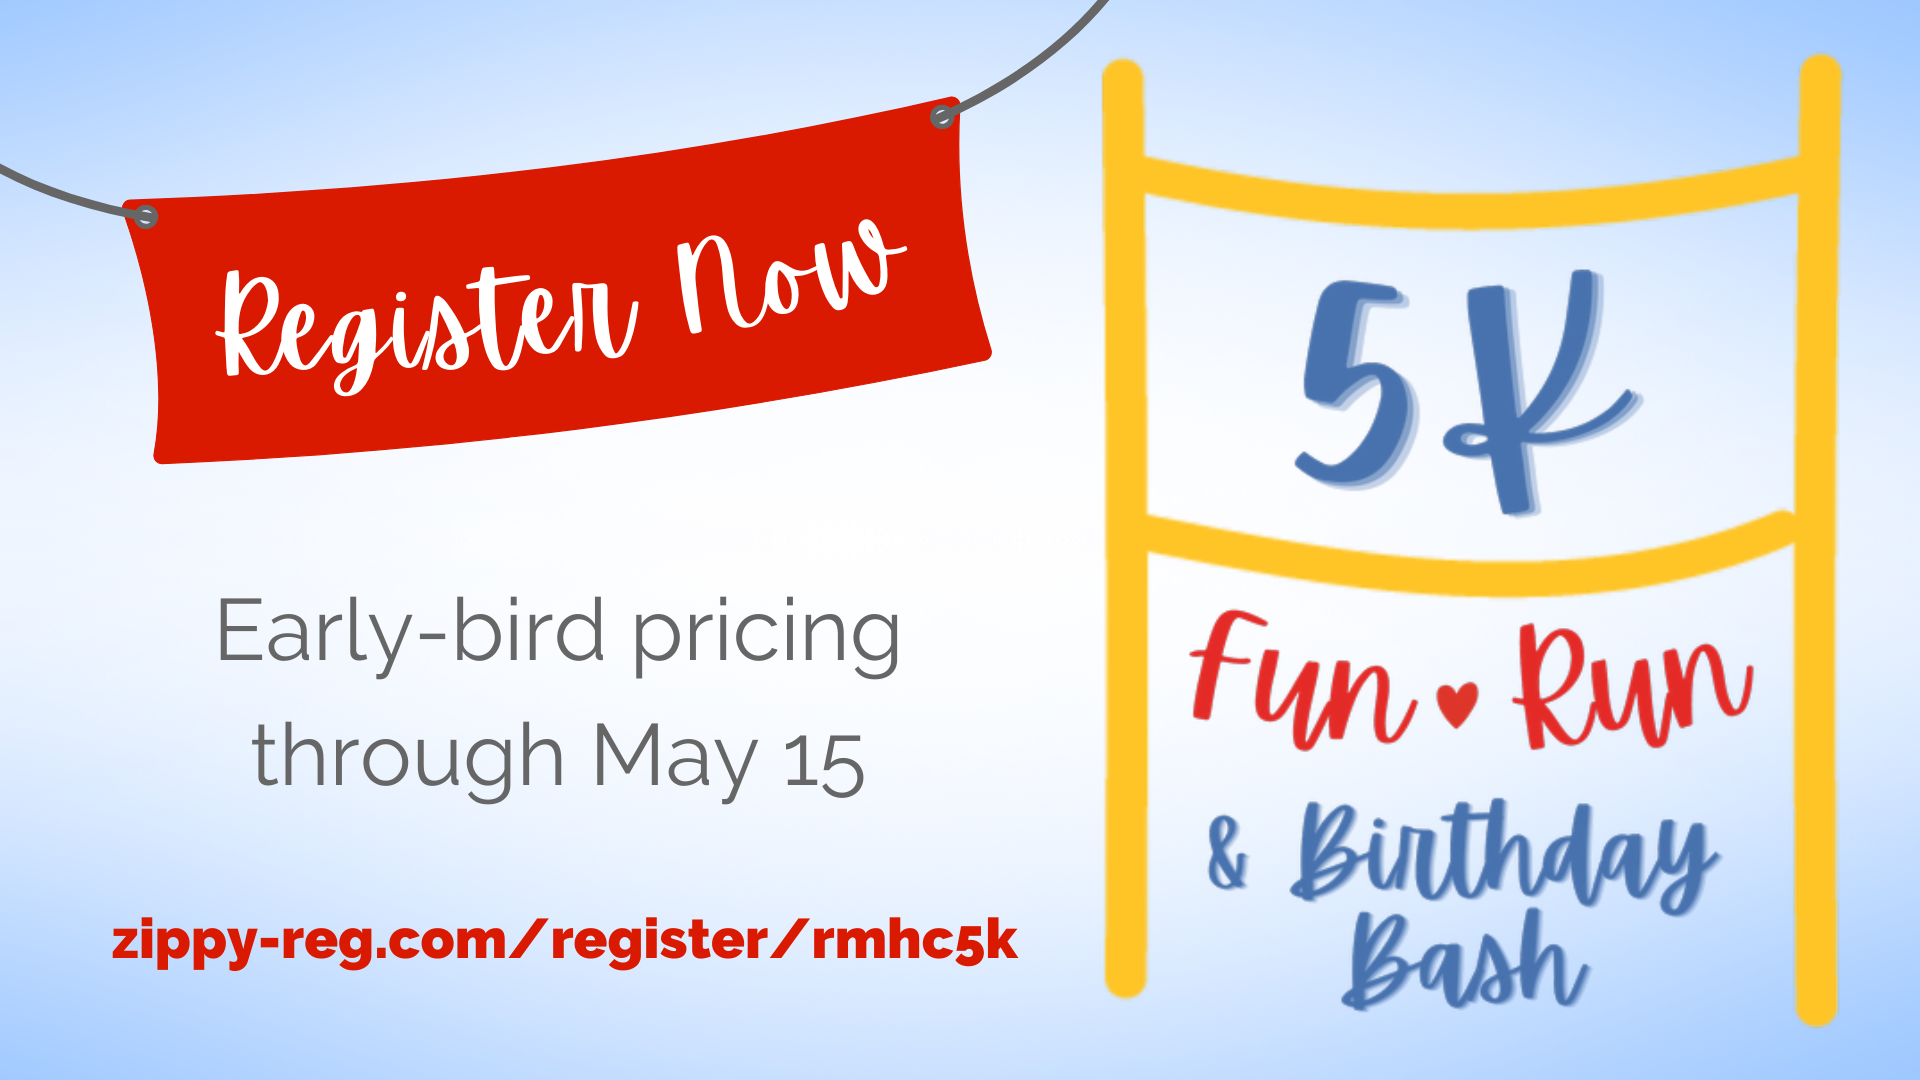 5K Fun Run graphic announcing early-bird registration pricing through May 15